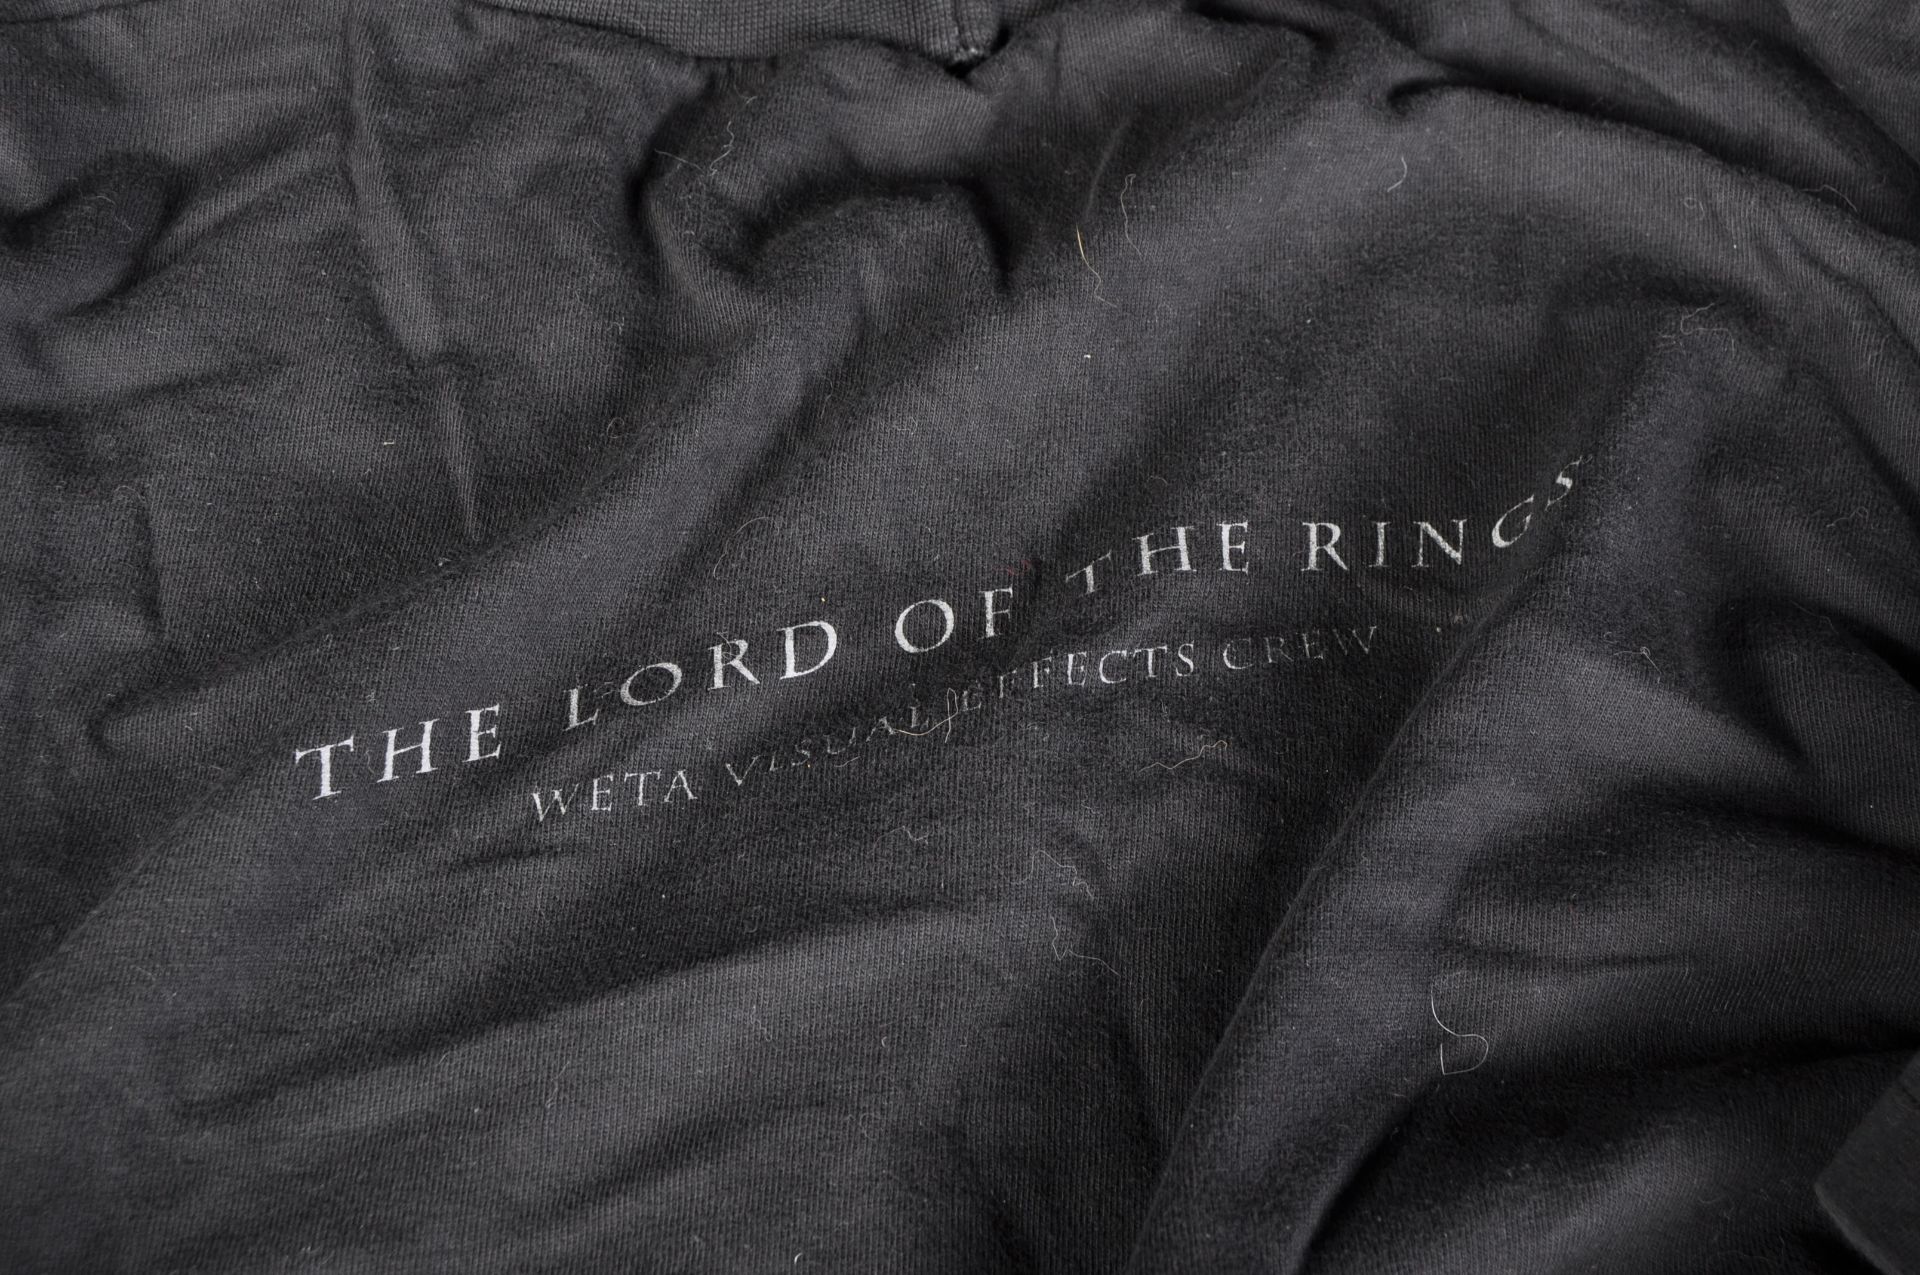 LORDS OF THE RINGS - WETA VISUAL EFFECTS CREW T-SHIRT - Bild 3 aus 4